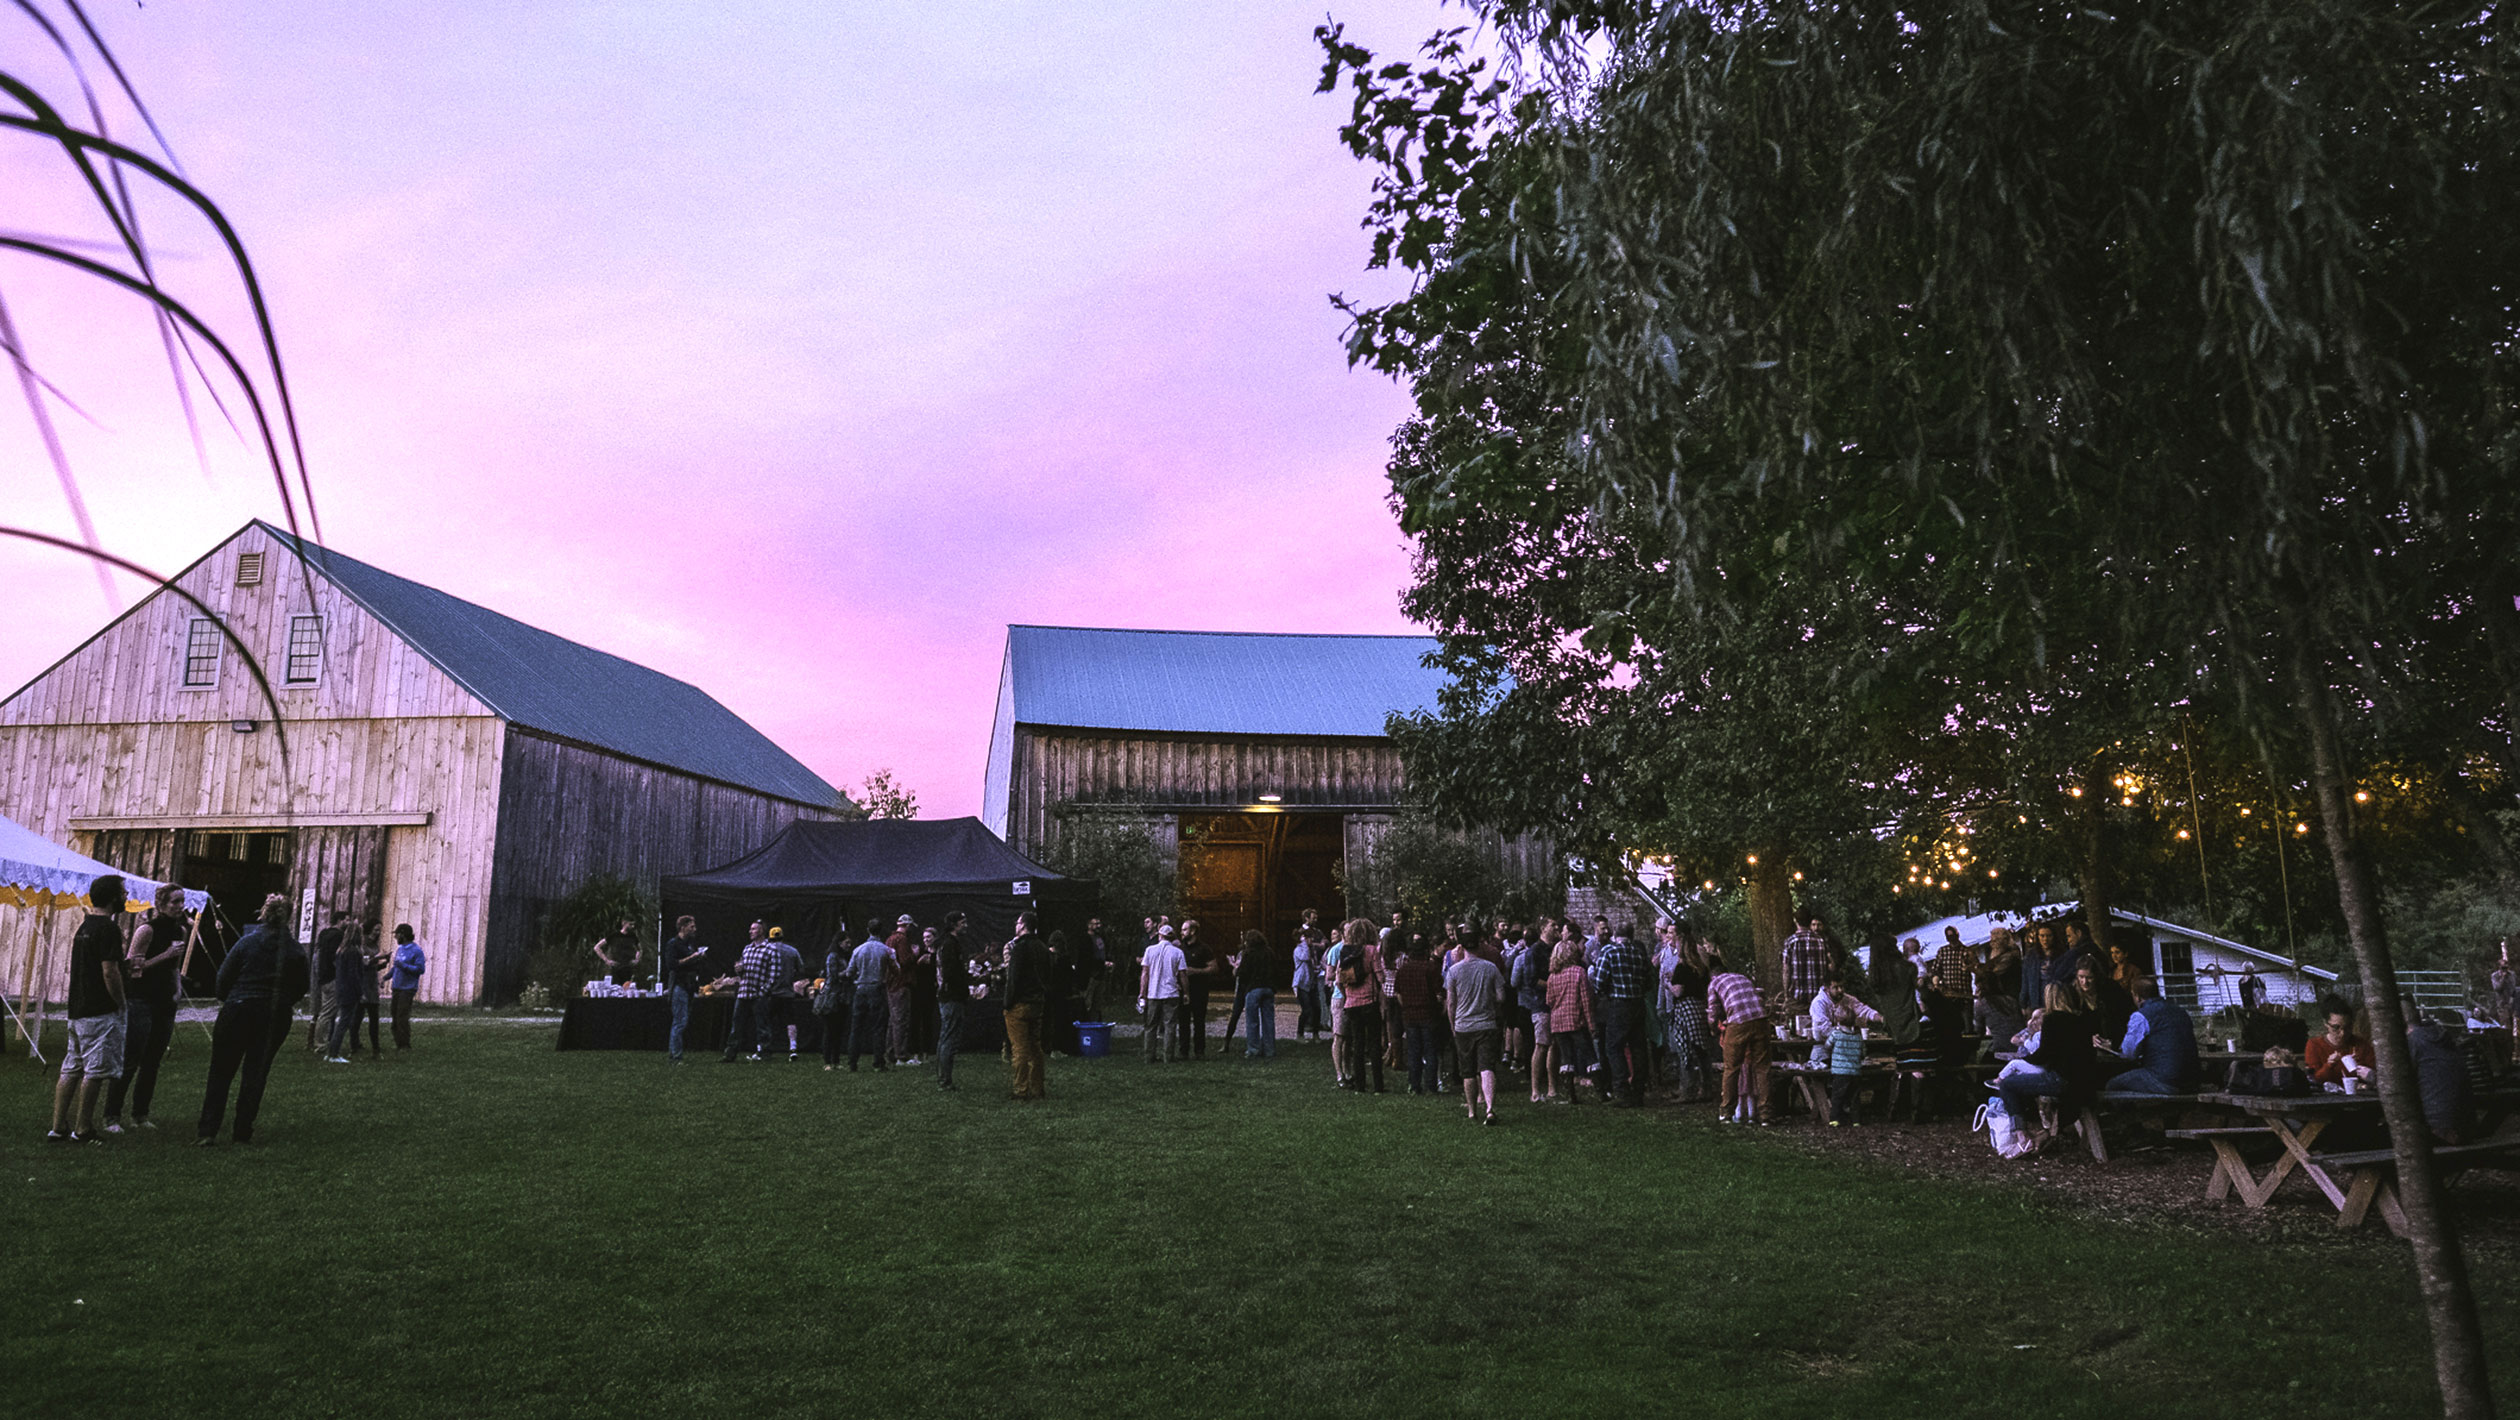 People gather outside of a brewery during an event organized by Allagash.